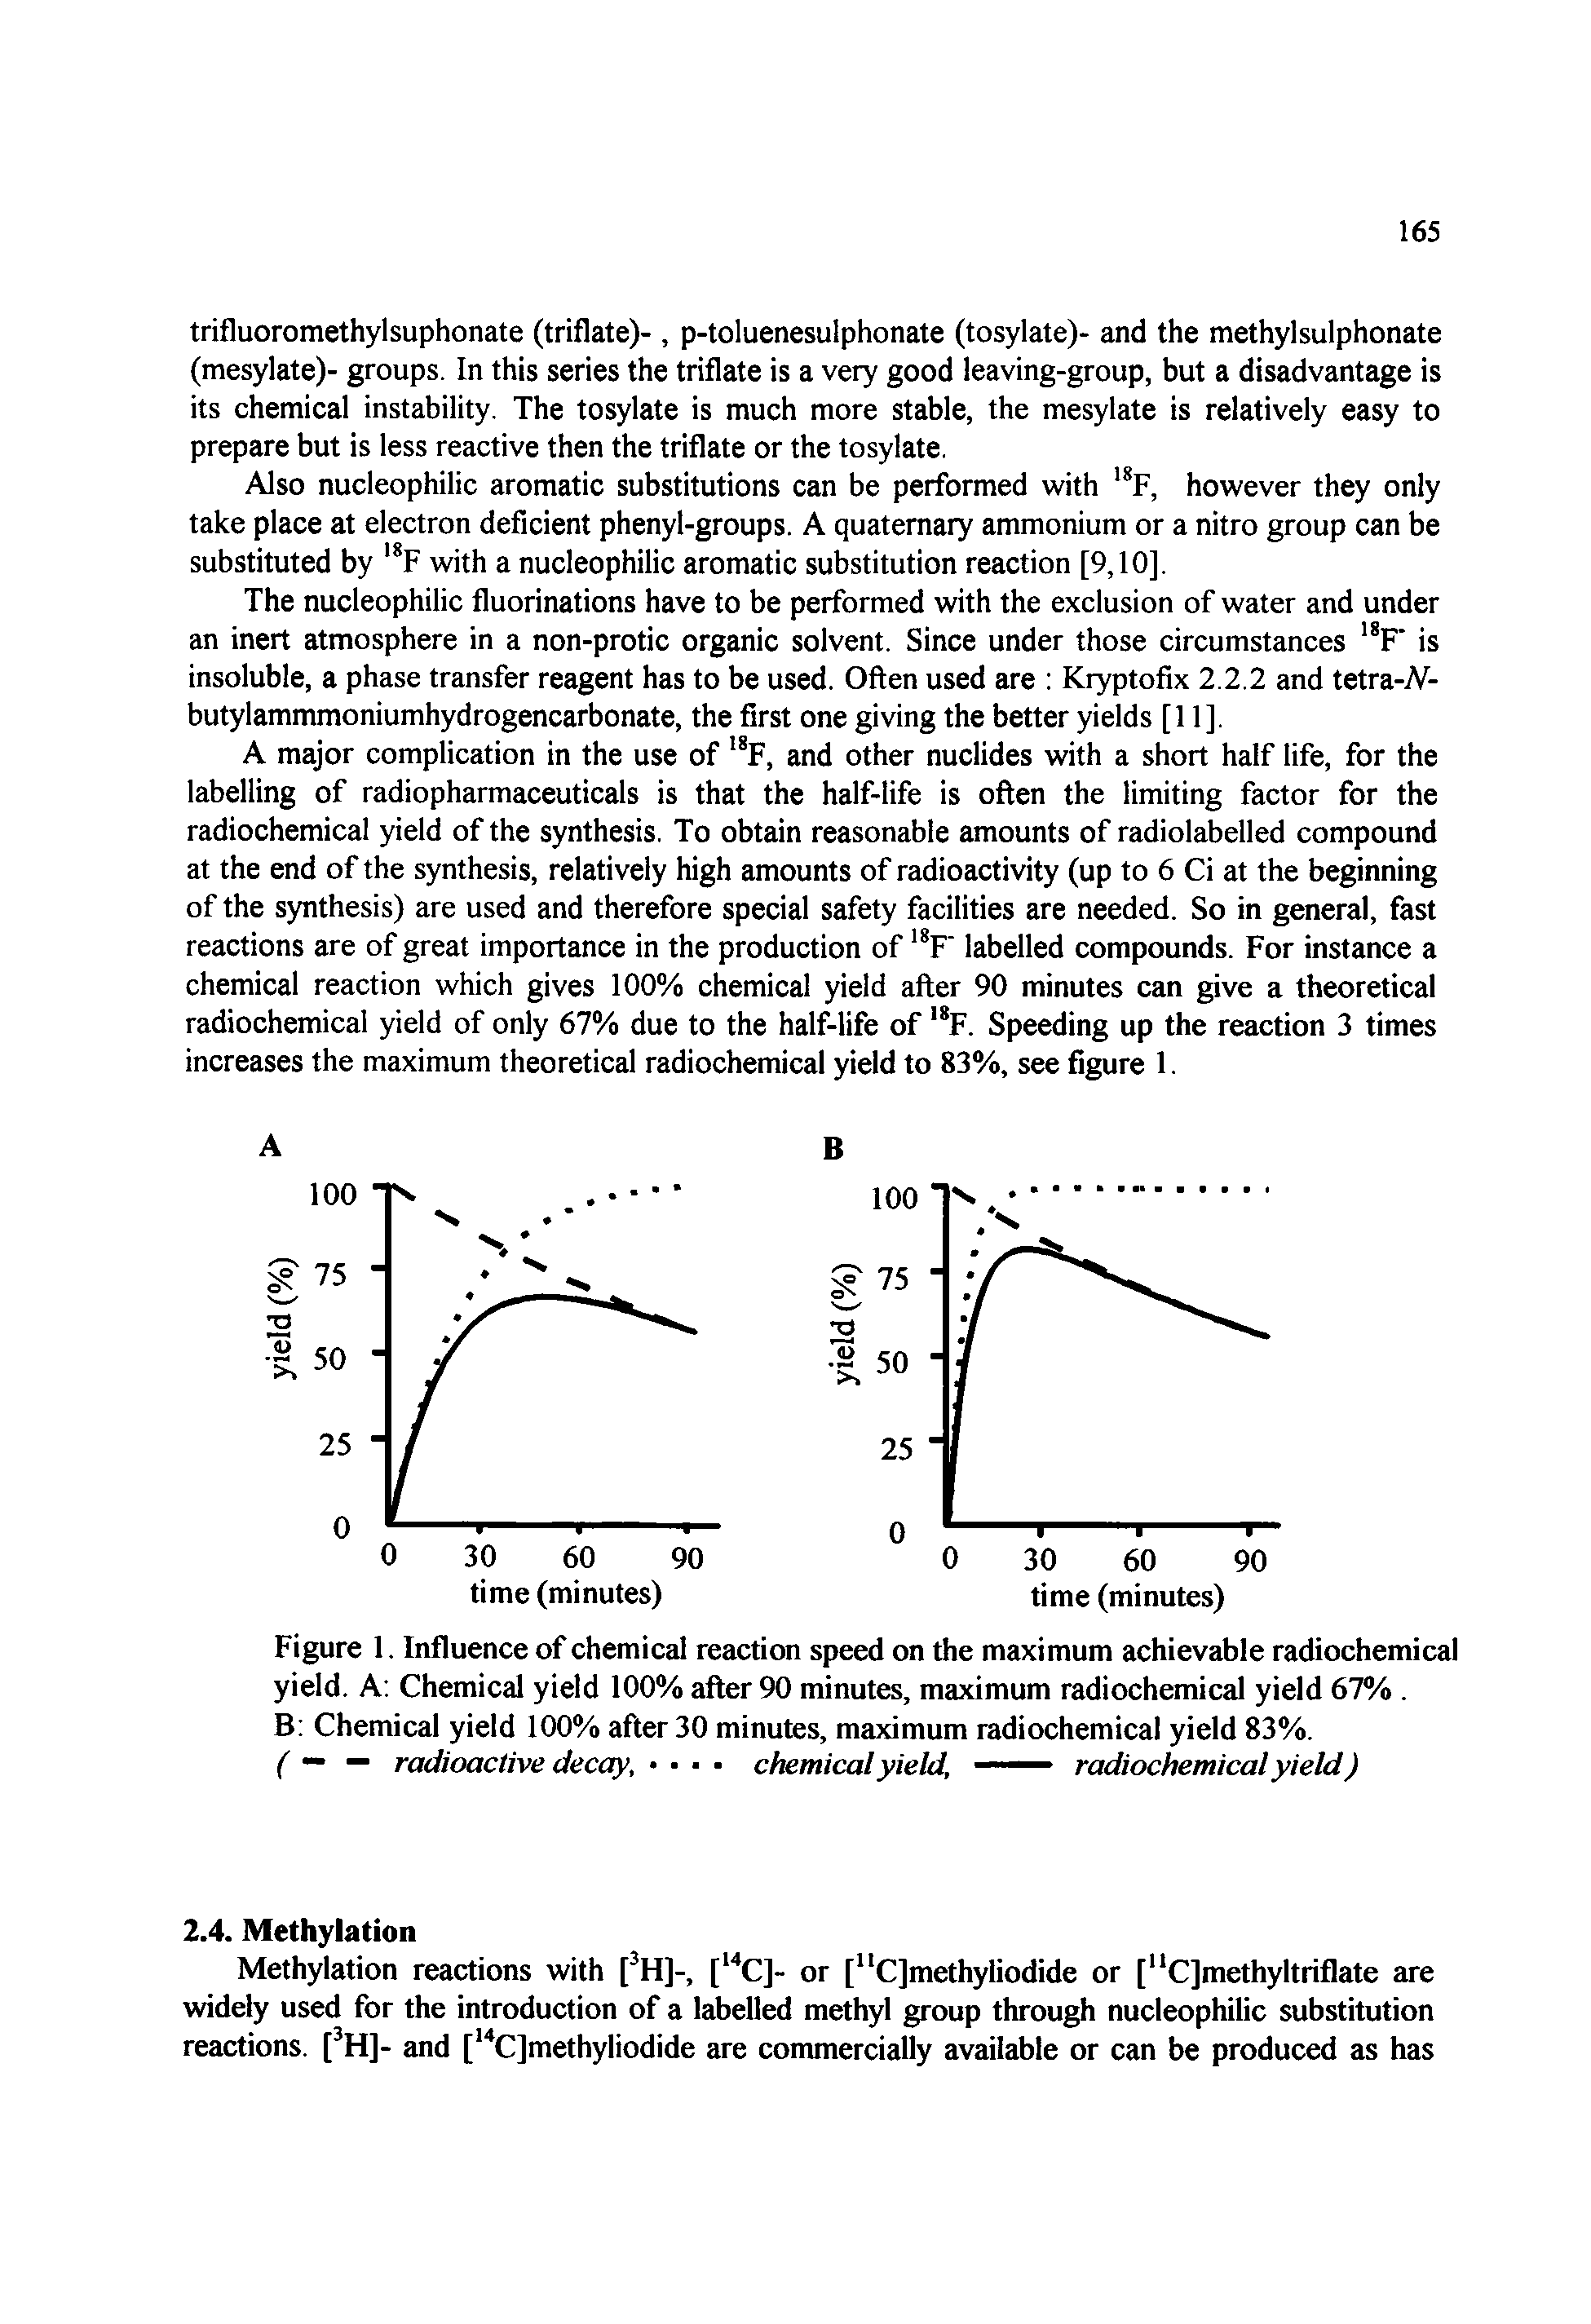 Figure 1. Influence of chemical reaction speed on the maximum achievable radiochemical yield. A Chemical yield 100% after 90 minutes, maximum radiochemical yield 67%. ...